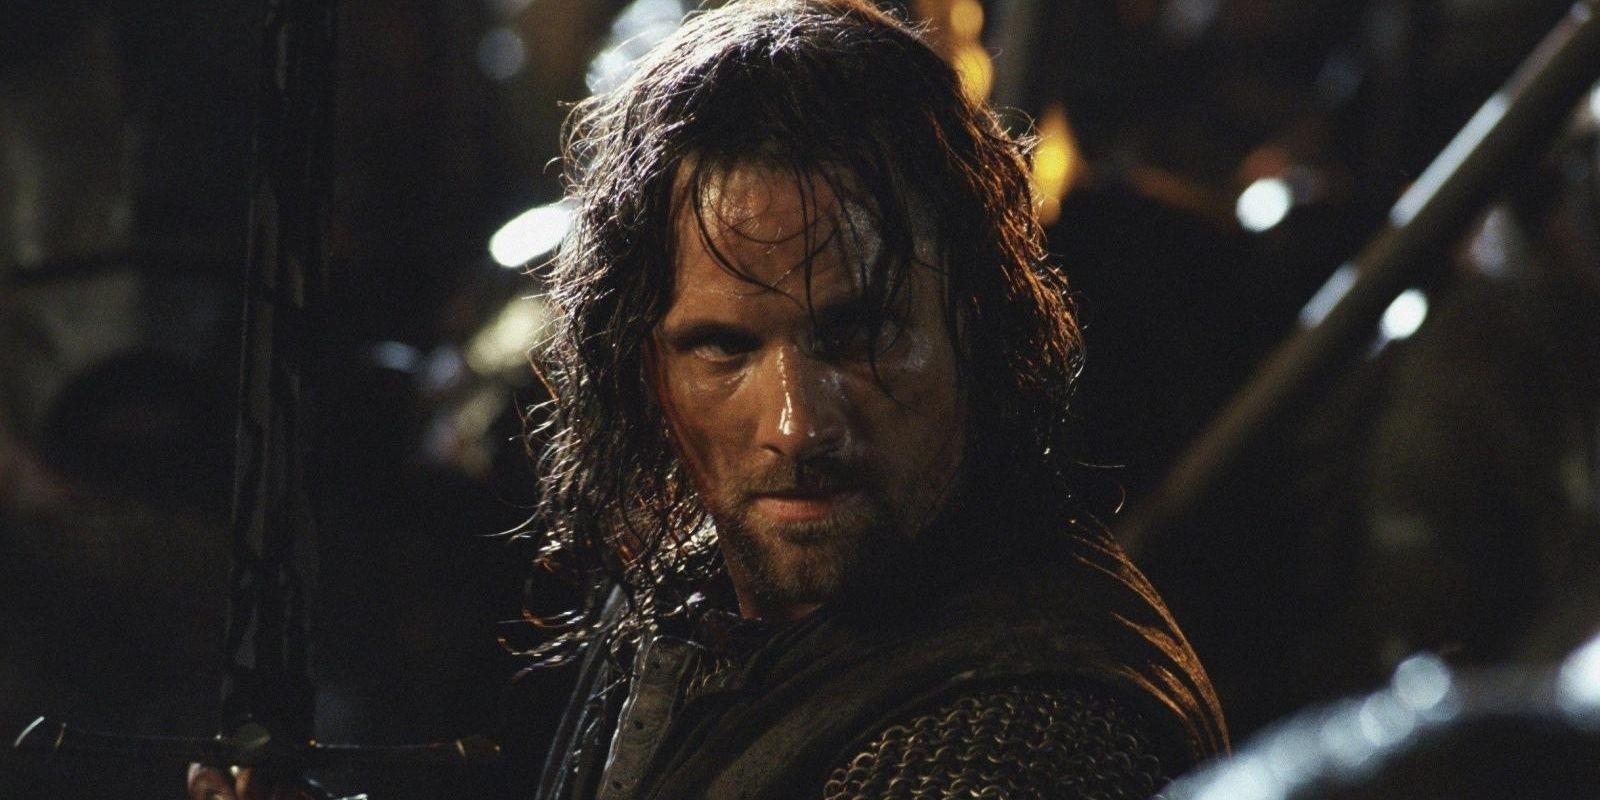 Aragorn at Helm's Deep in The Two Towers